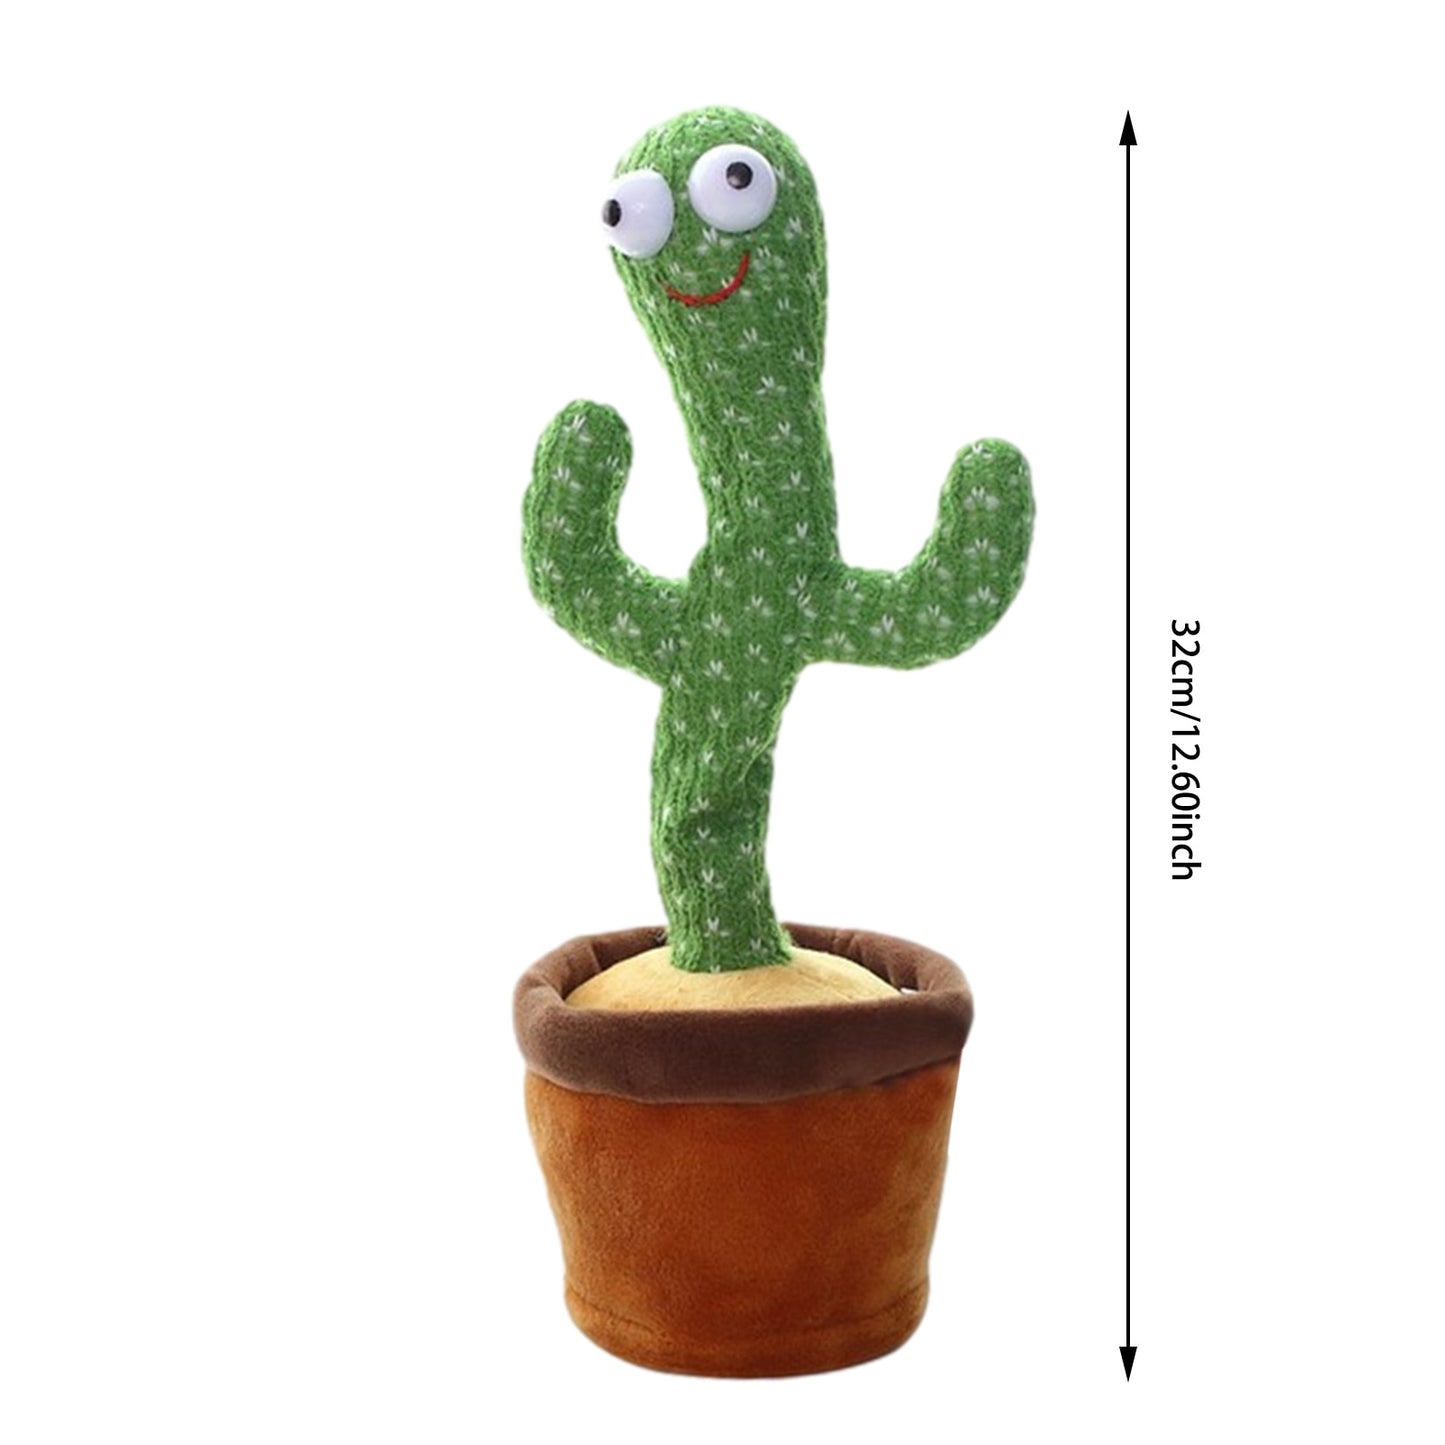 Electrical Dancing Cactus Plush Toy Singing and Dancing - ChildAngle